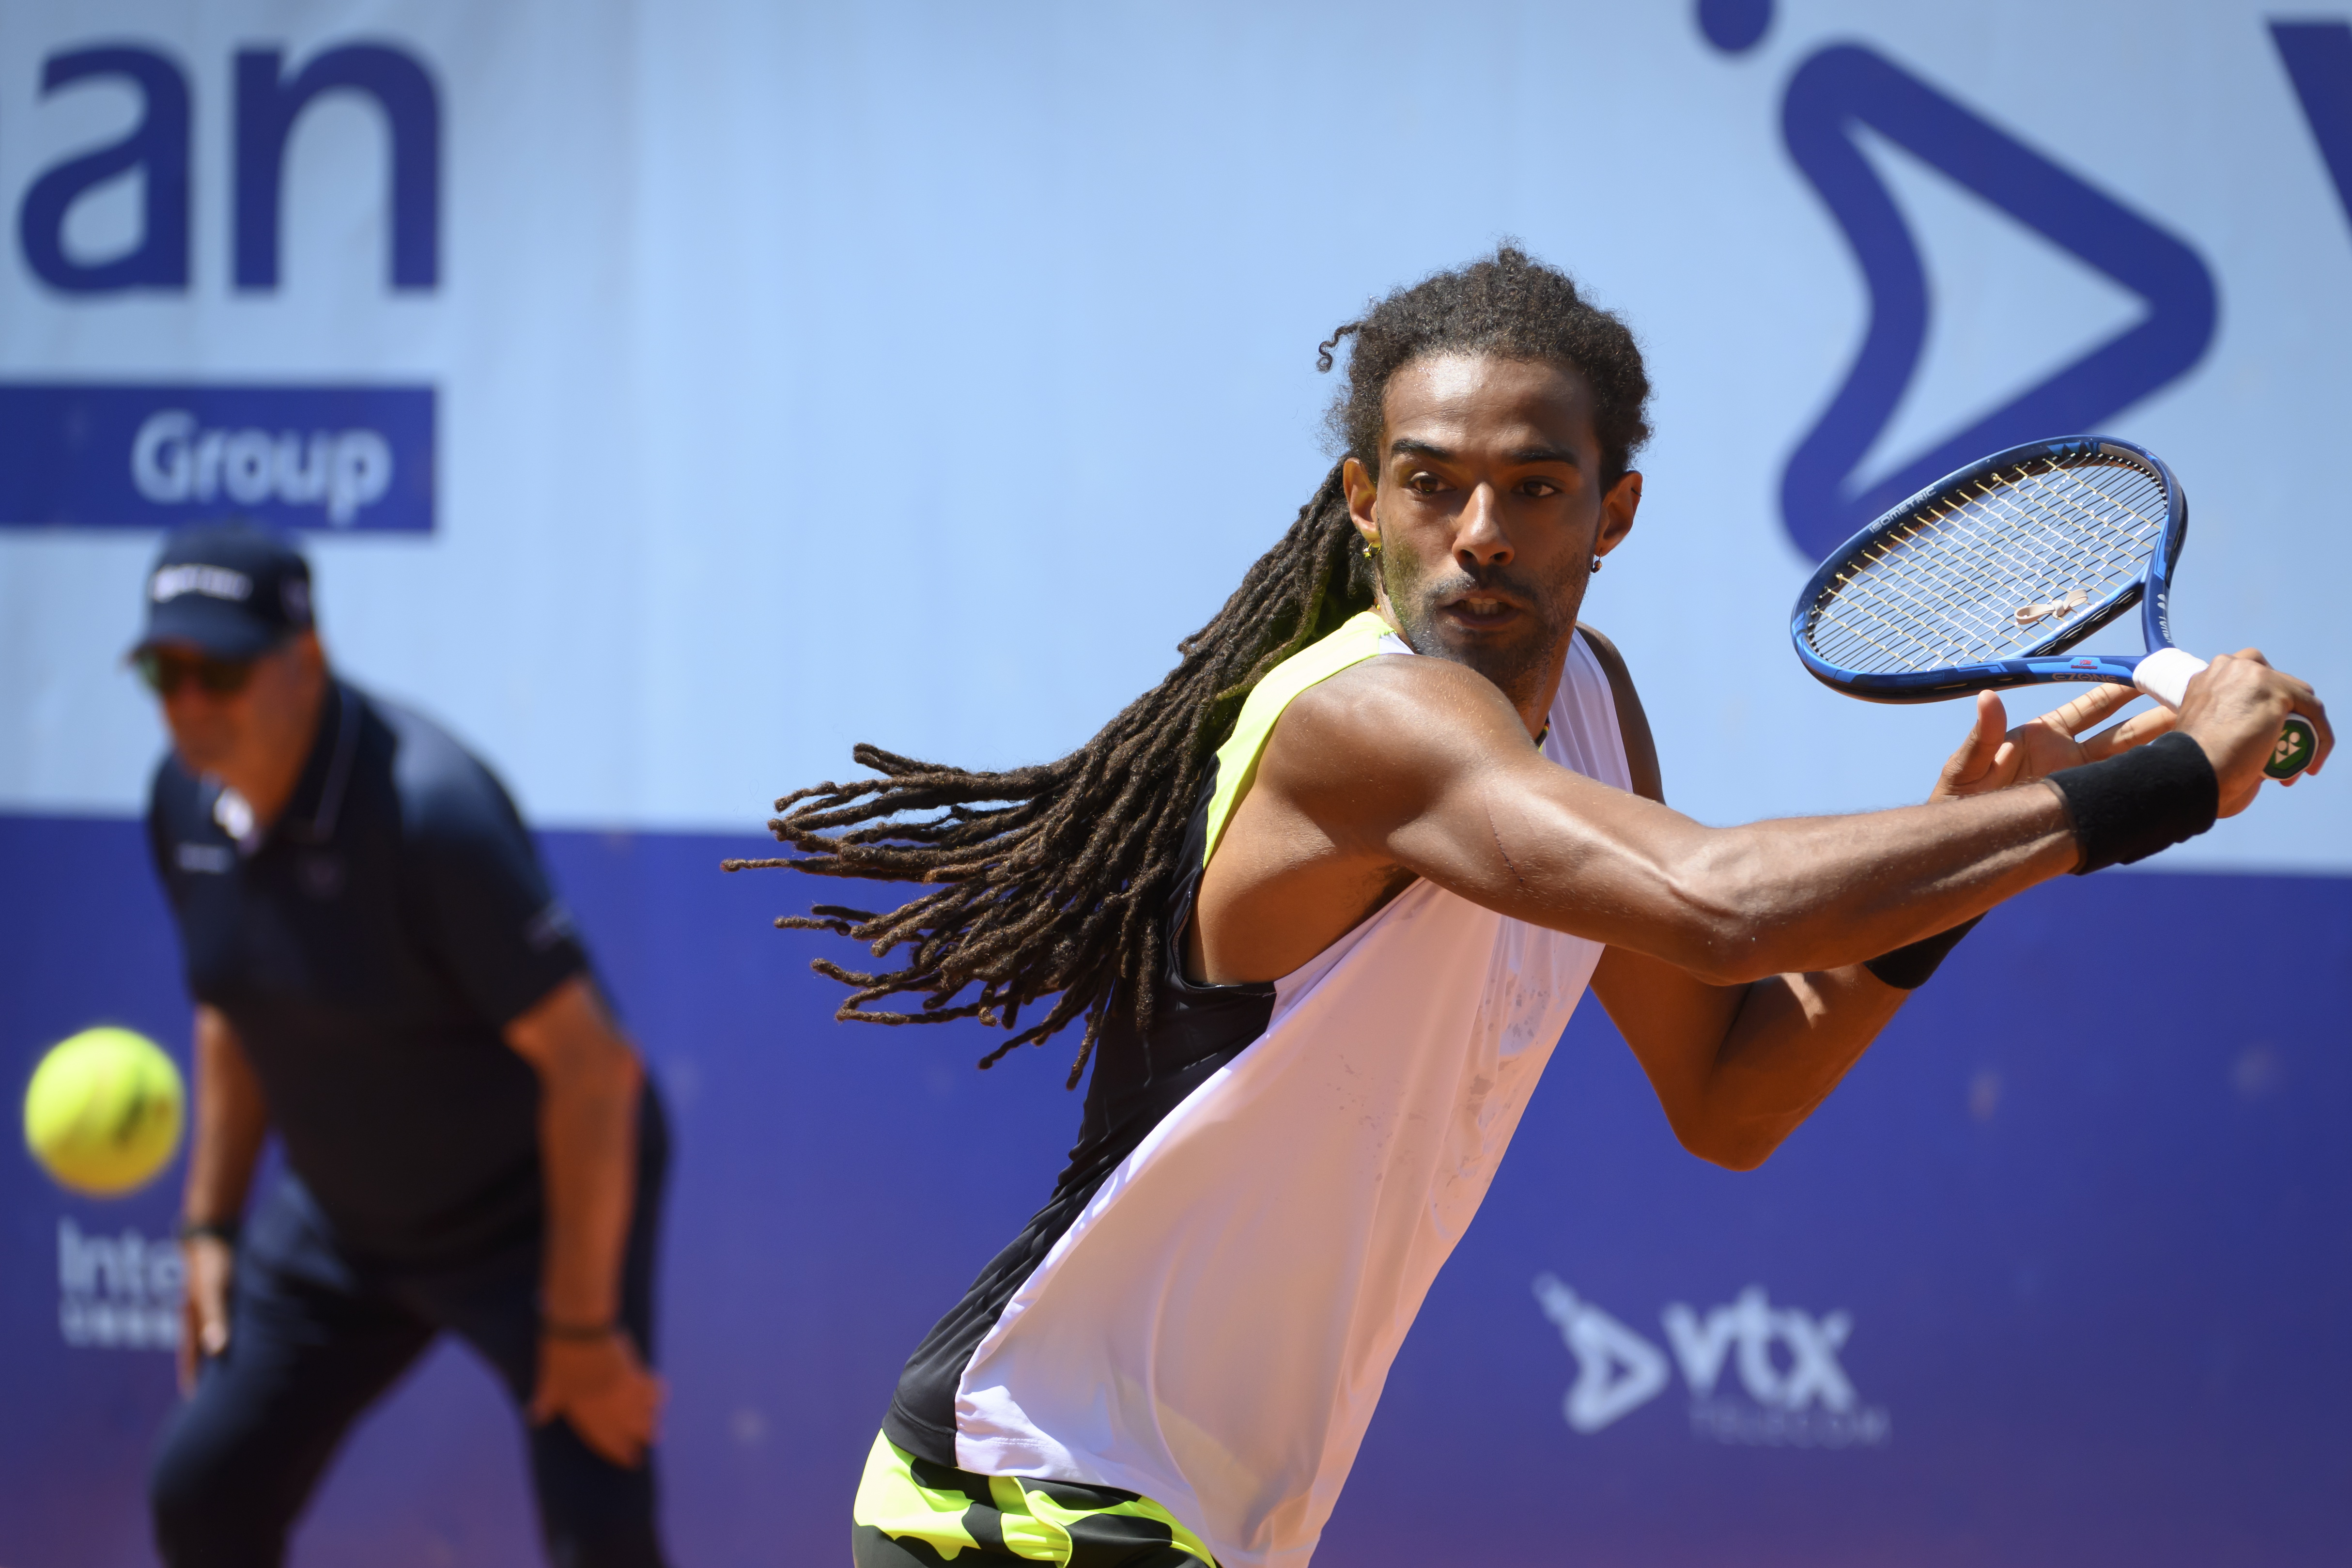 Dubai set to host exciting Tie Break Tens in October - GulfToday